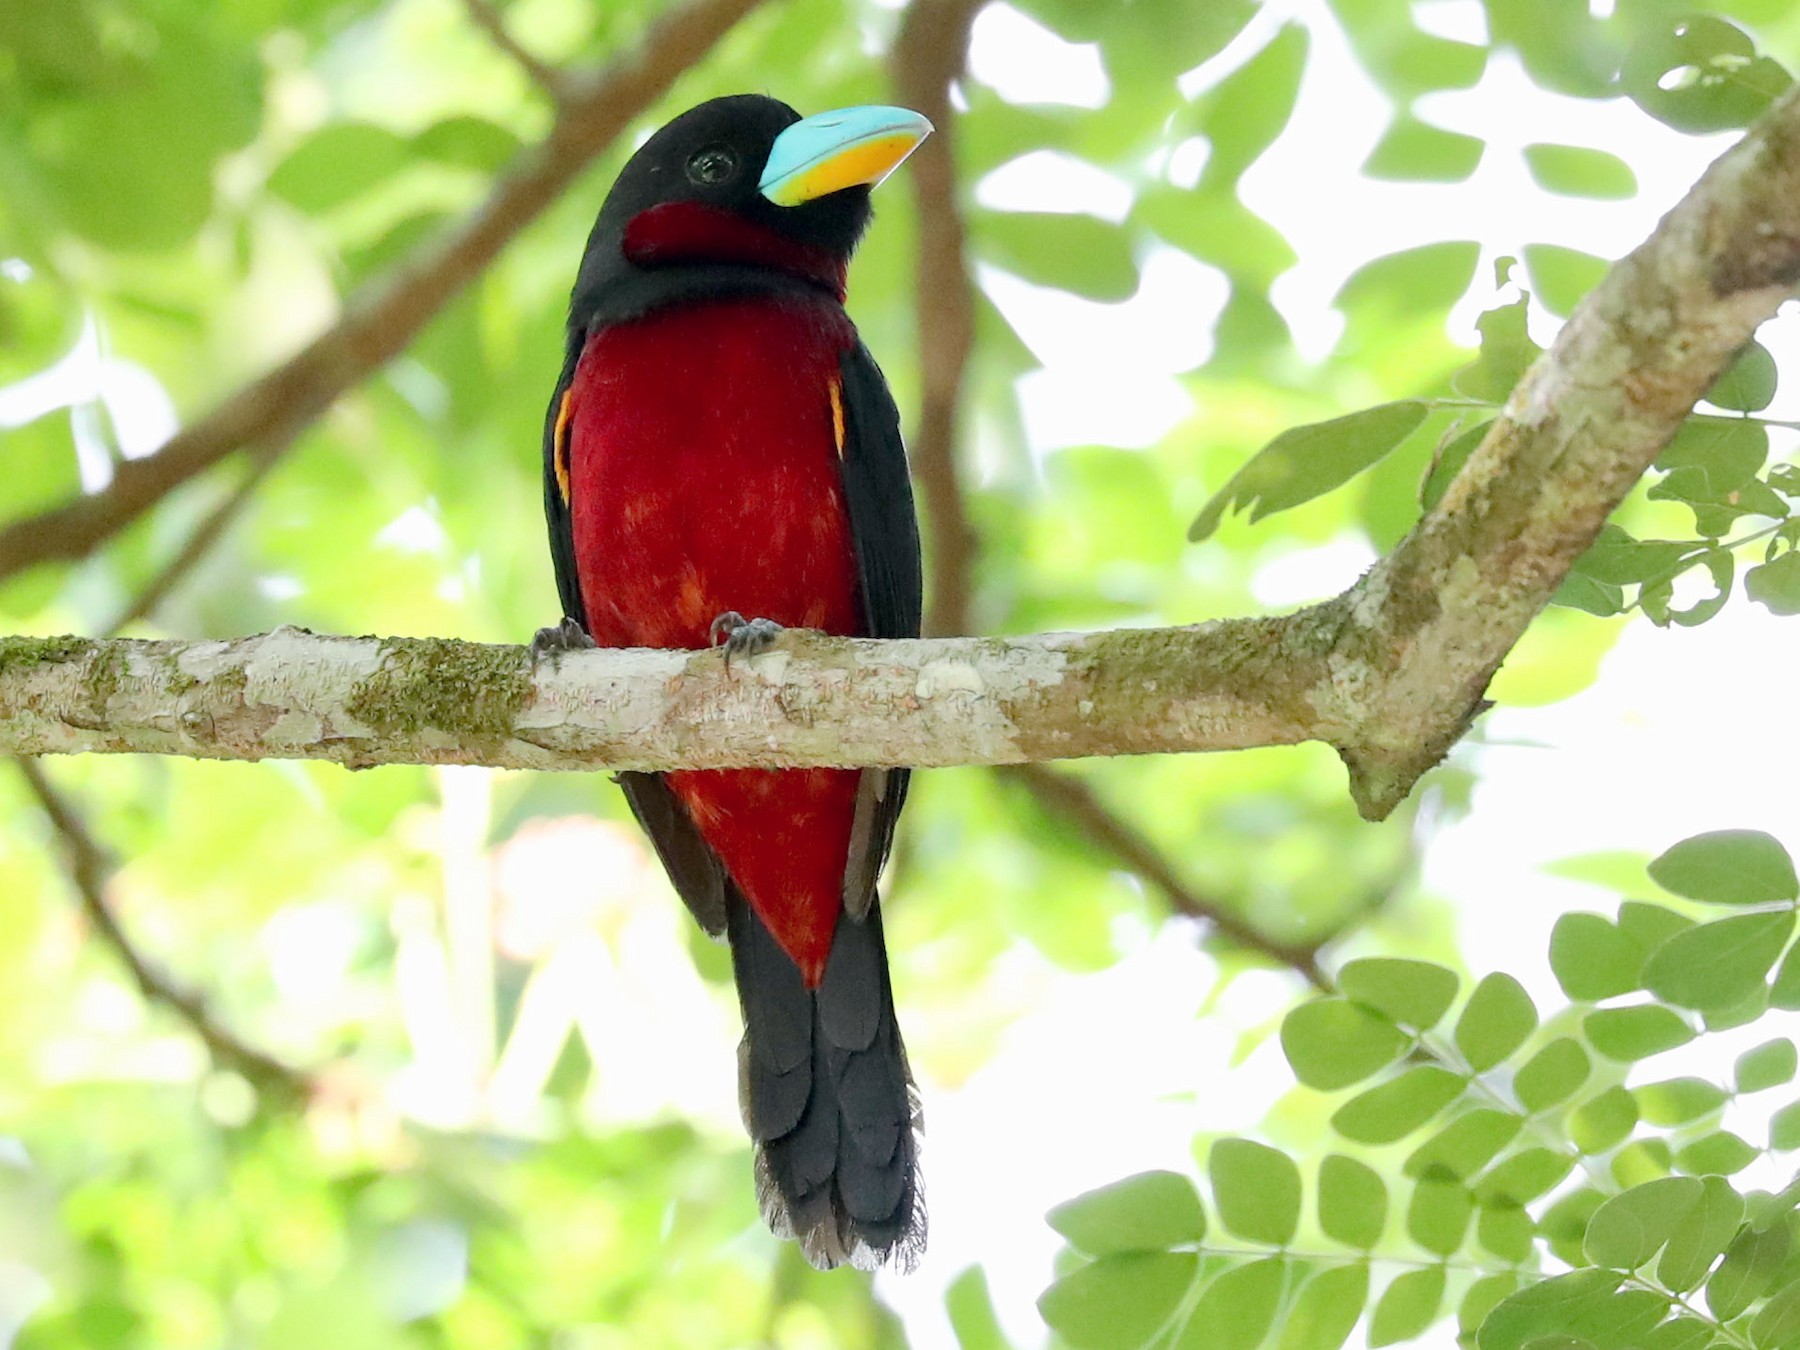 Black-and-red Broadbill - Ting-Wei (廷維) HUNG (洪)